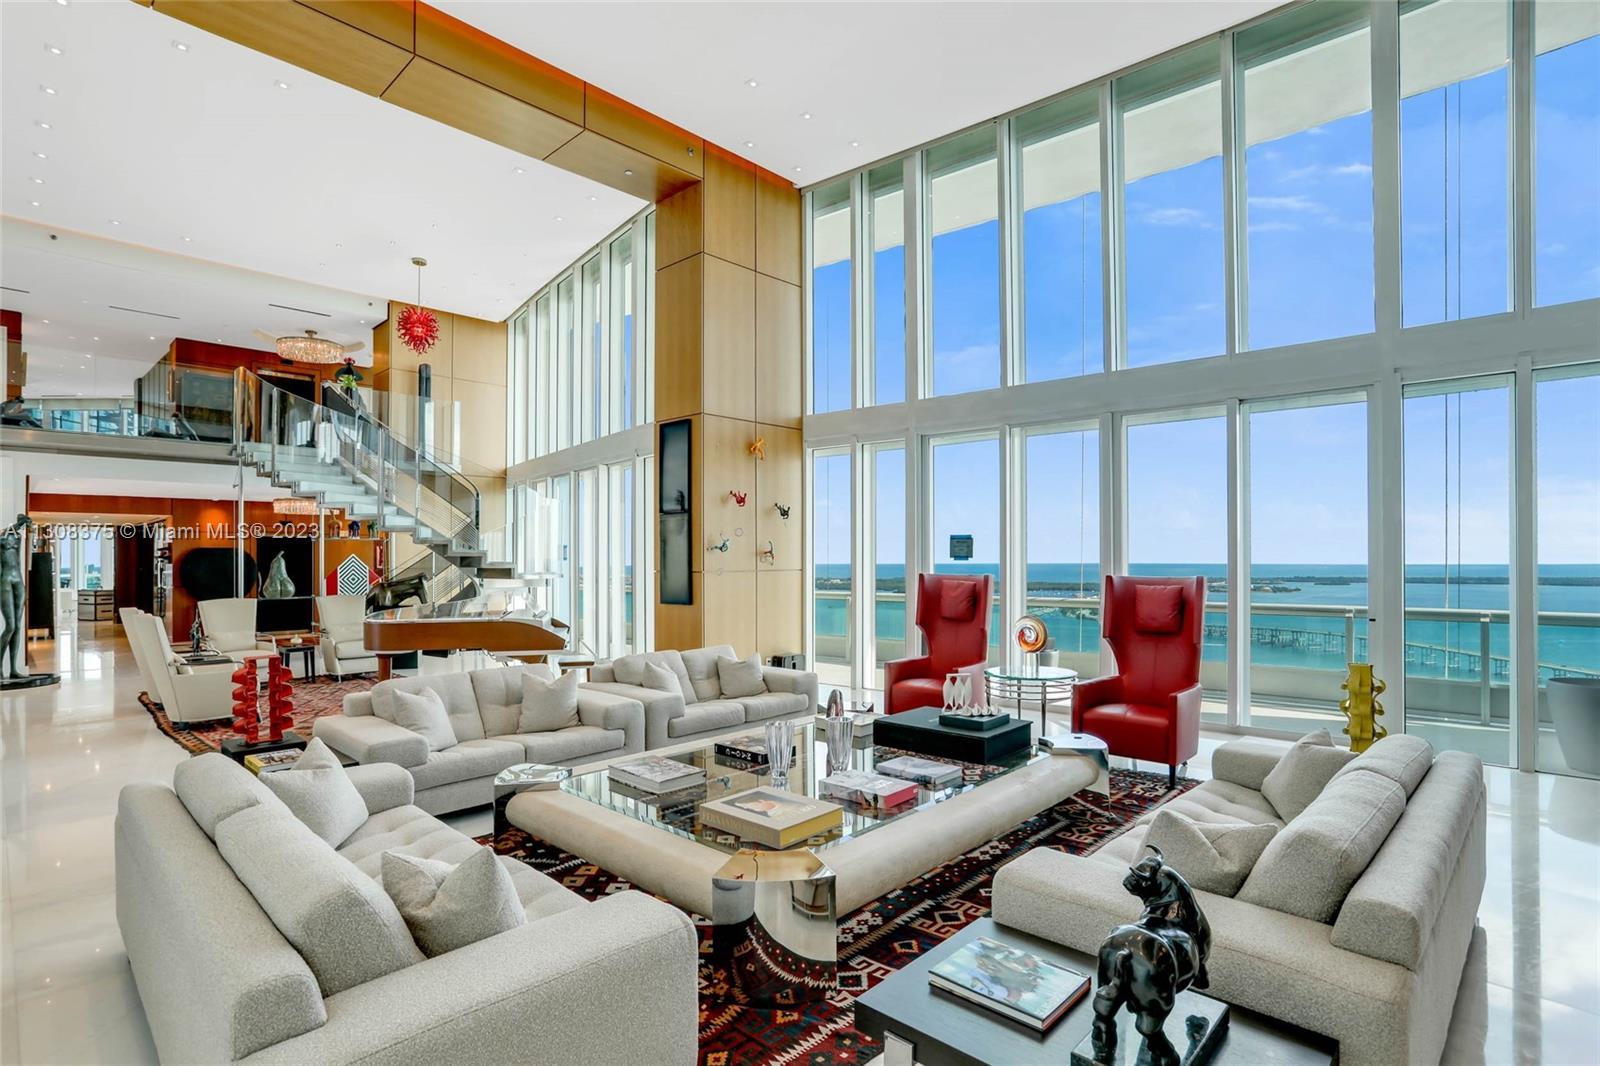 This is an absolutely gorgeous and stunning 10,000 sq. ft.  duplex  in the sky with 180 degree views